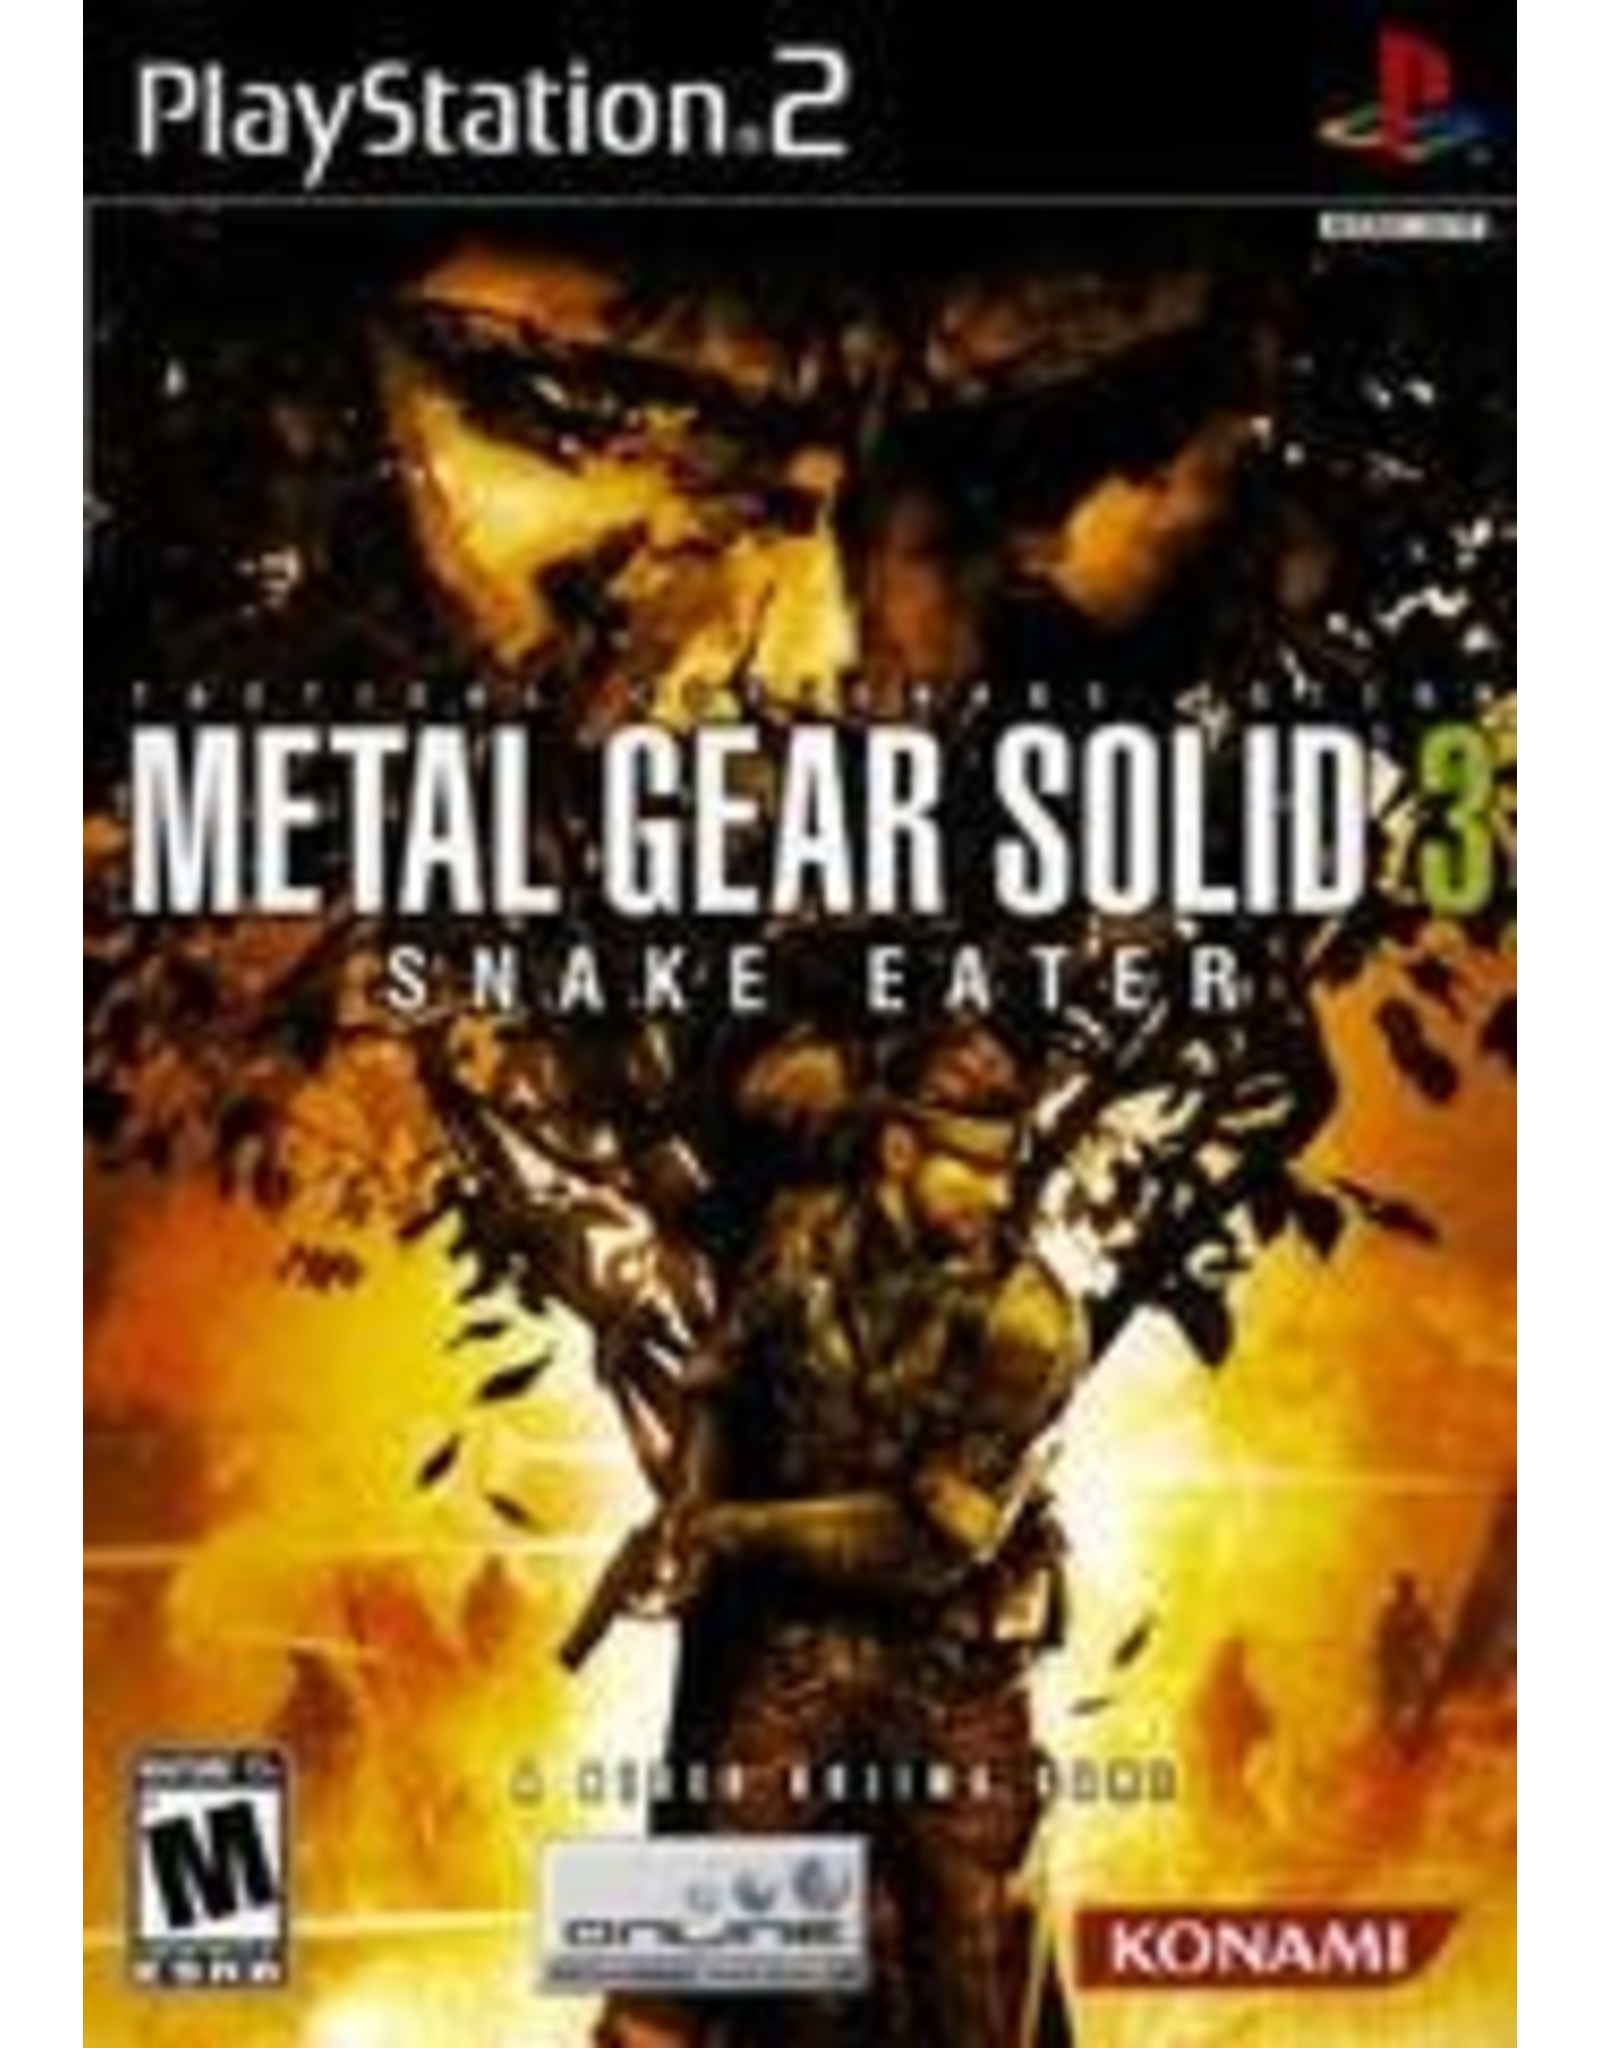 Playstation 2 Metal Gear Solid 3 Snake Eater (Used)